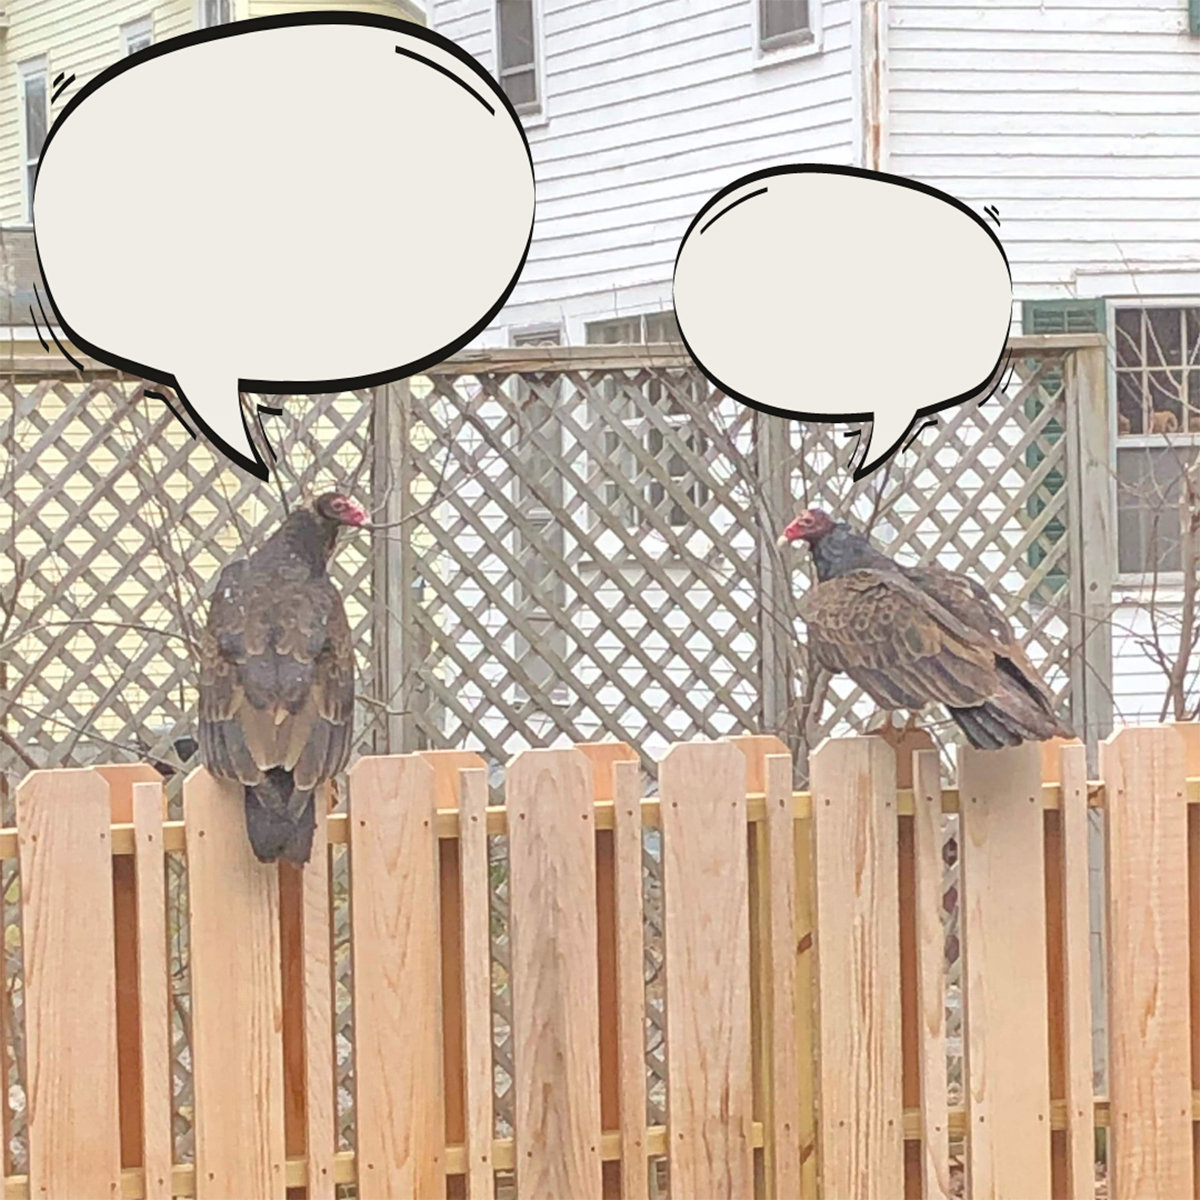 WHAT'S UP? — Kirkland Town Library is holding a Caption Contest for those who would like to guess what these two turkey vultures from Clinton are saying to each other.